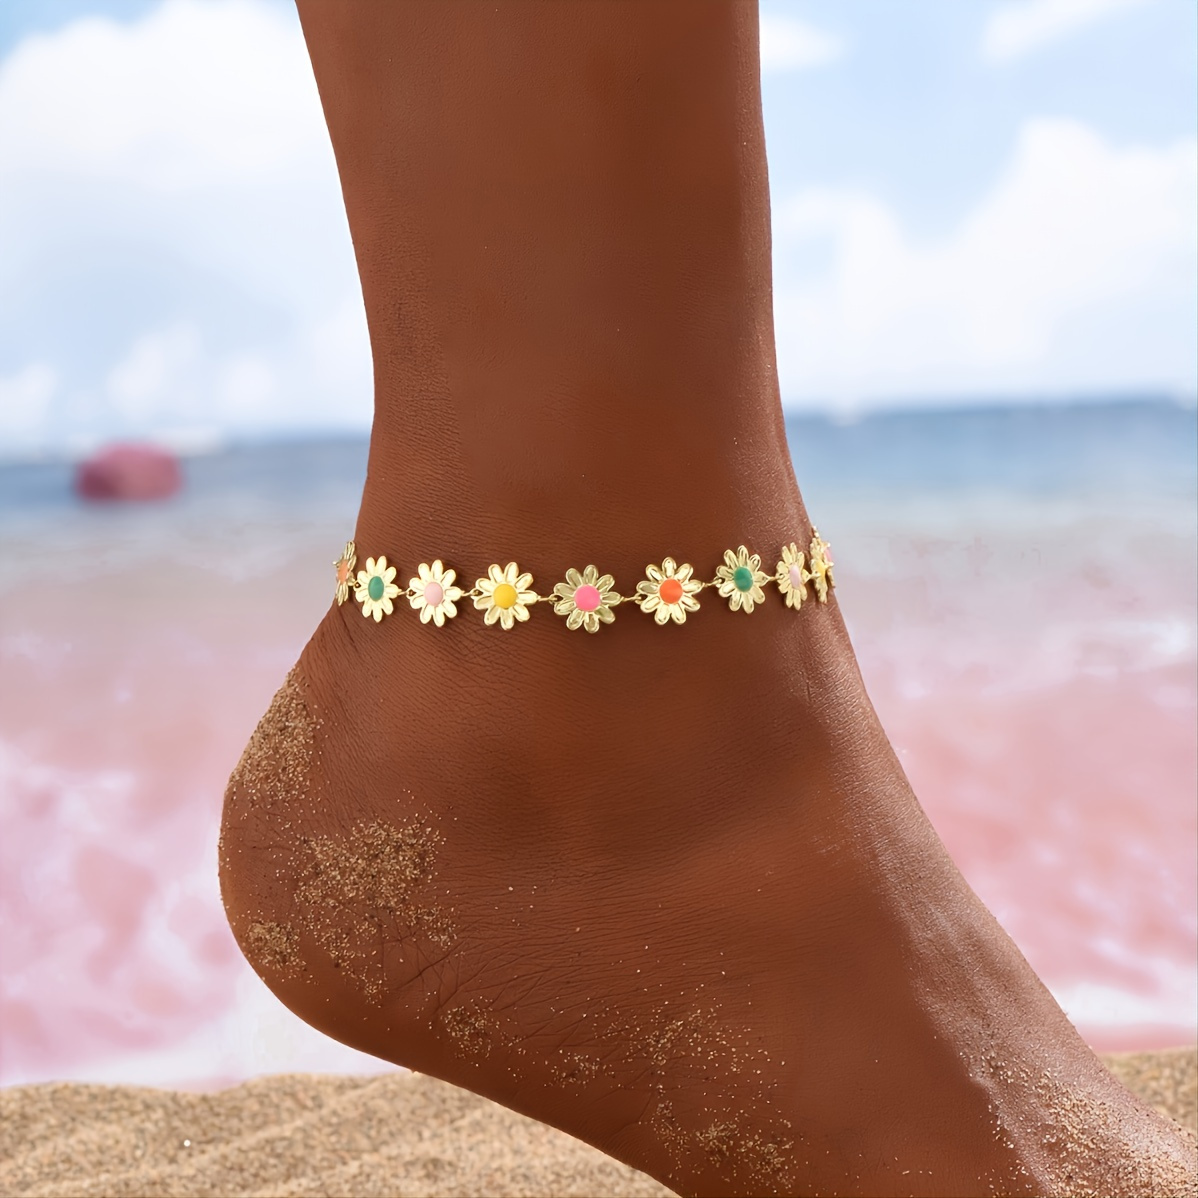 

Flower Shape Beaded Anklet Candy Color Dainty Ankle Bracelet Personality Adjustable Foot Jewelry Party Gift